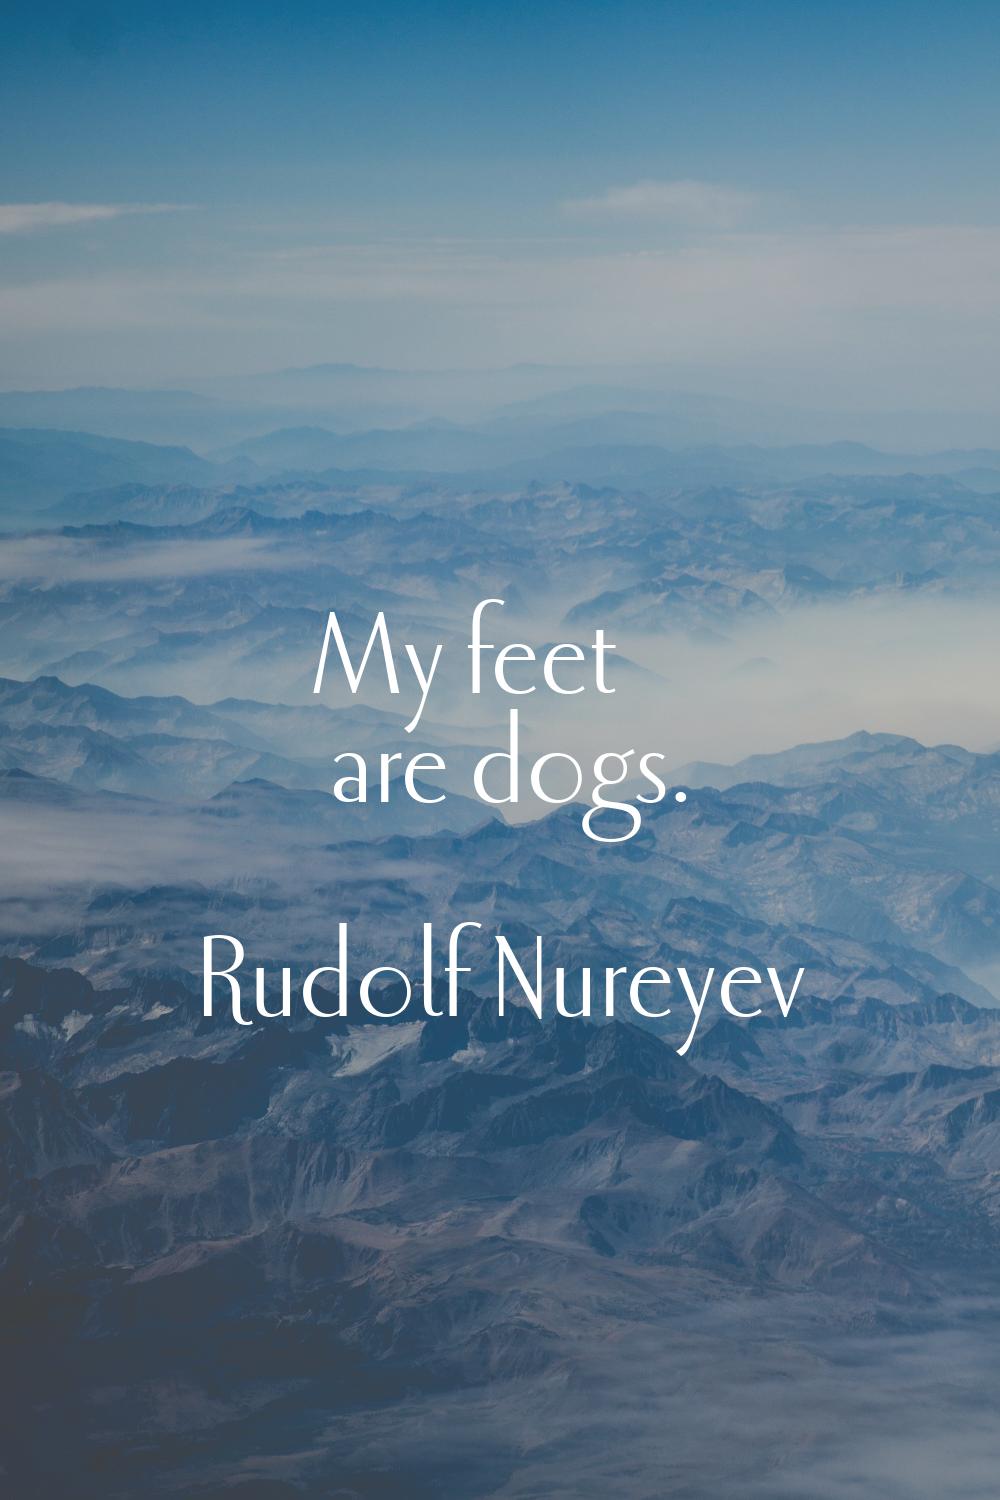 My feet are dogs.